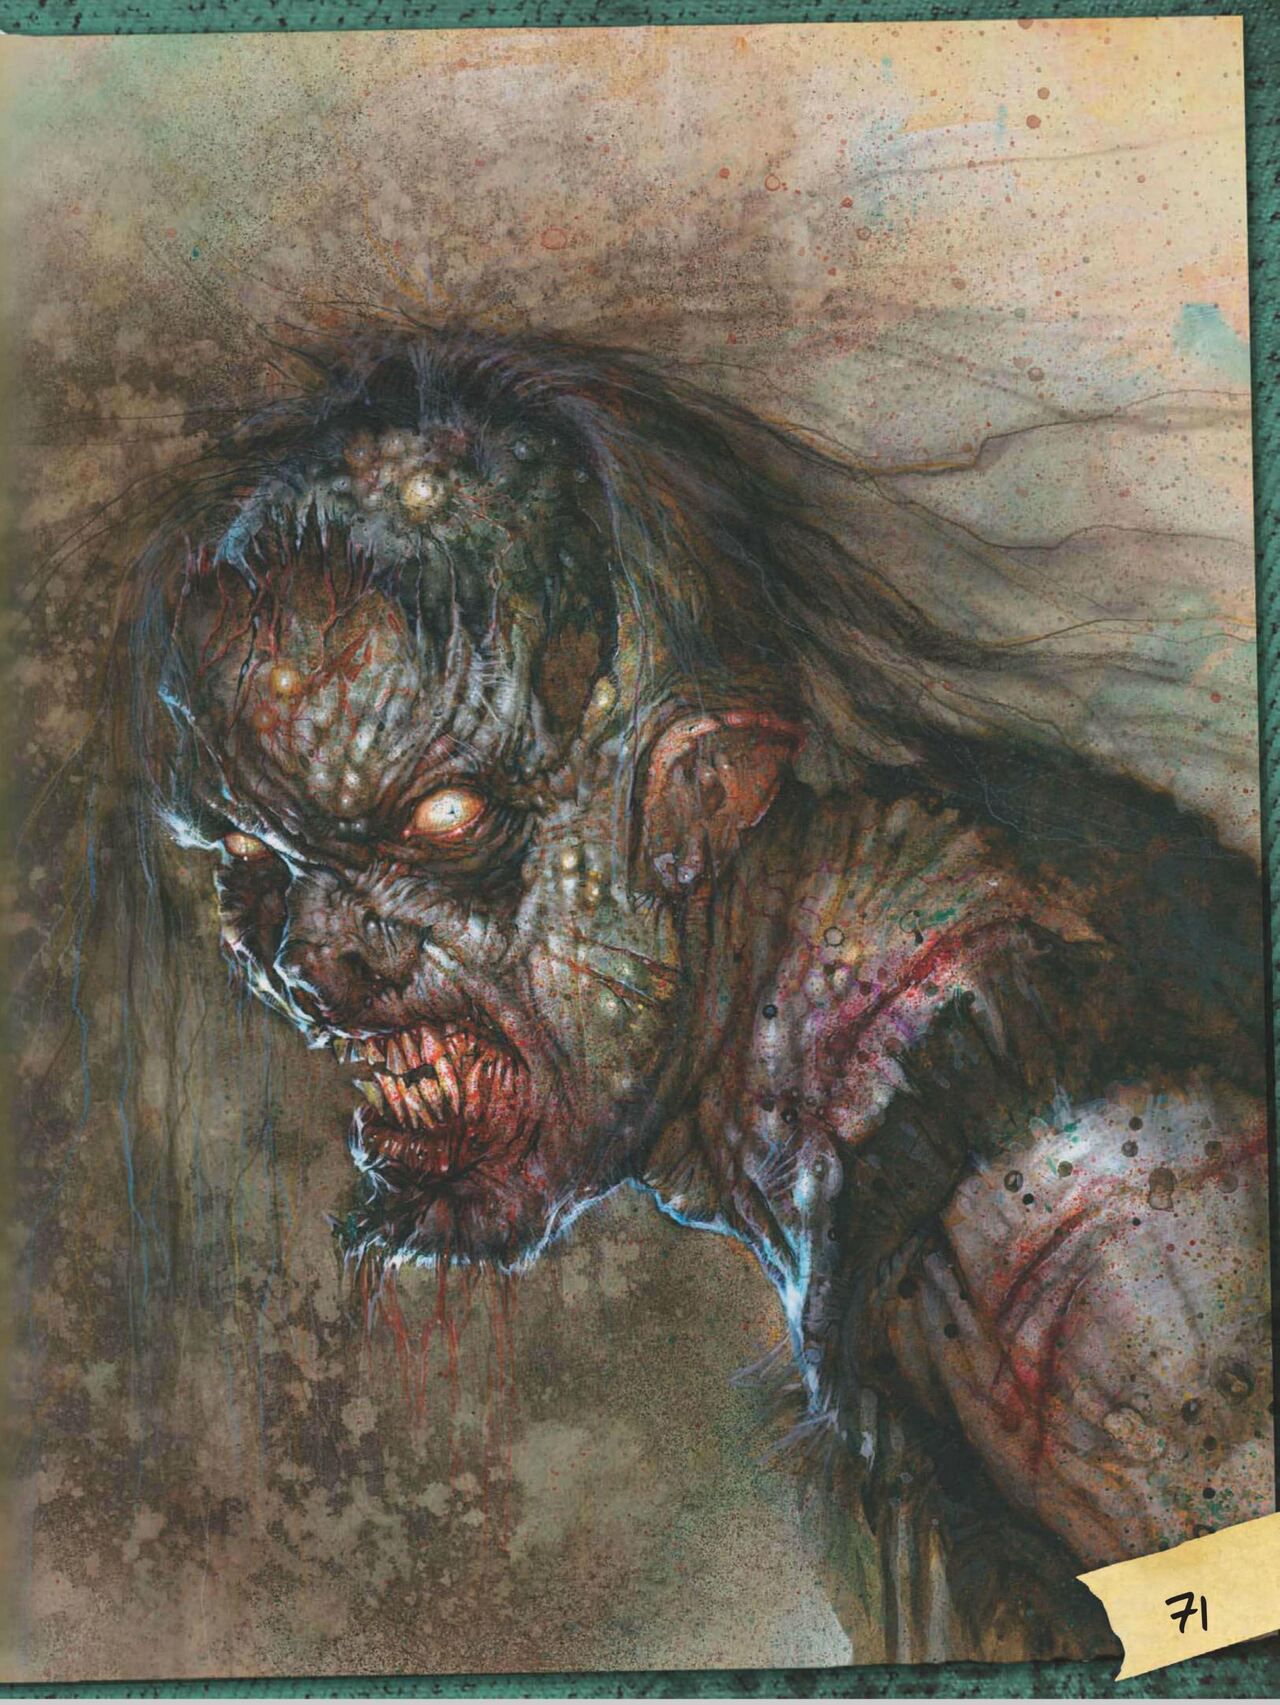 How to Draw Zombies: Discover the secrets to drawing, painting, and illustrating the undead 僵尸描绘集 72